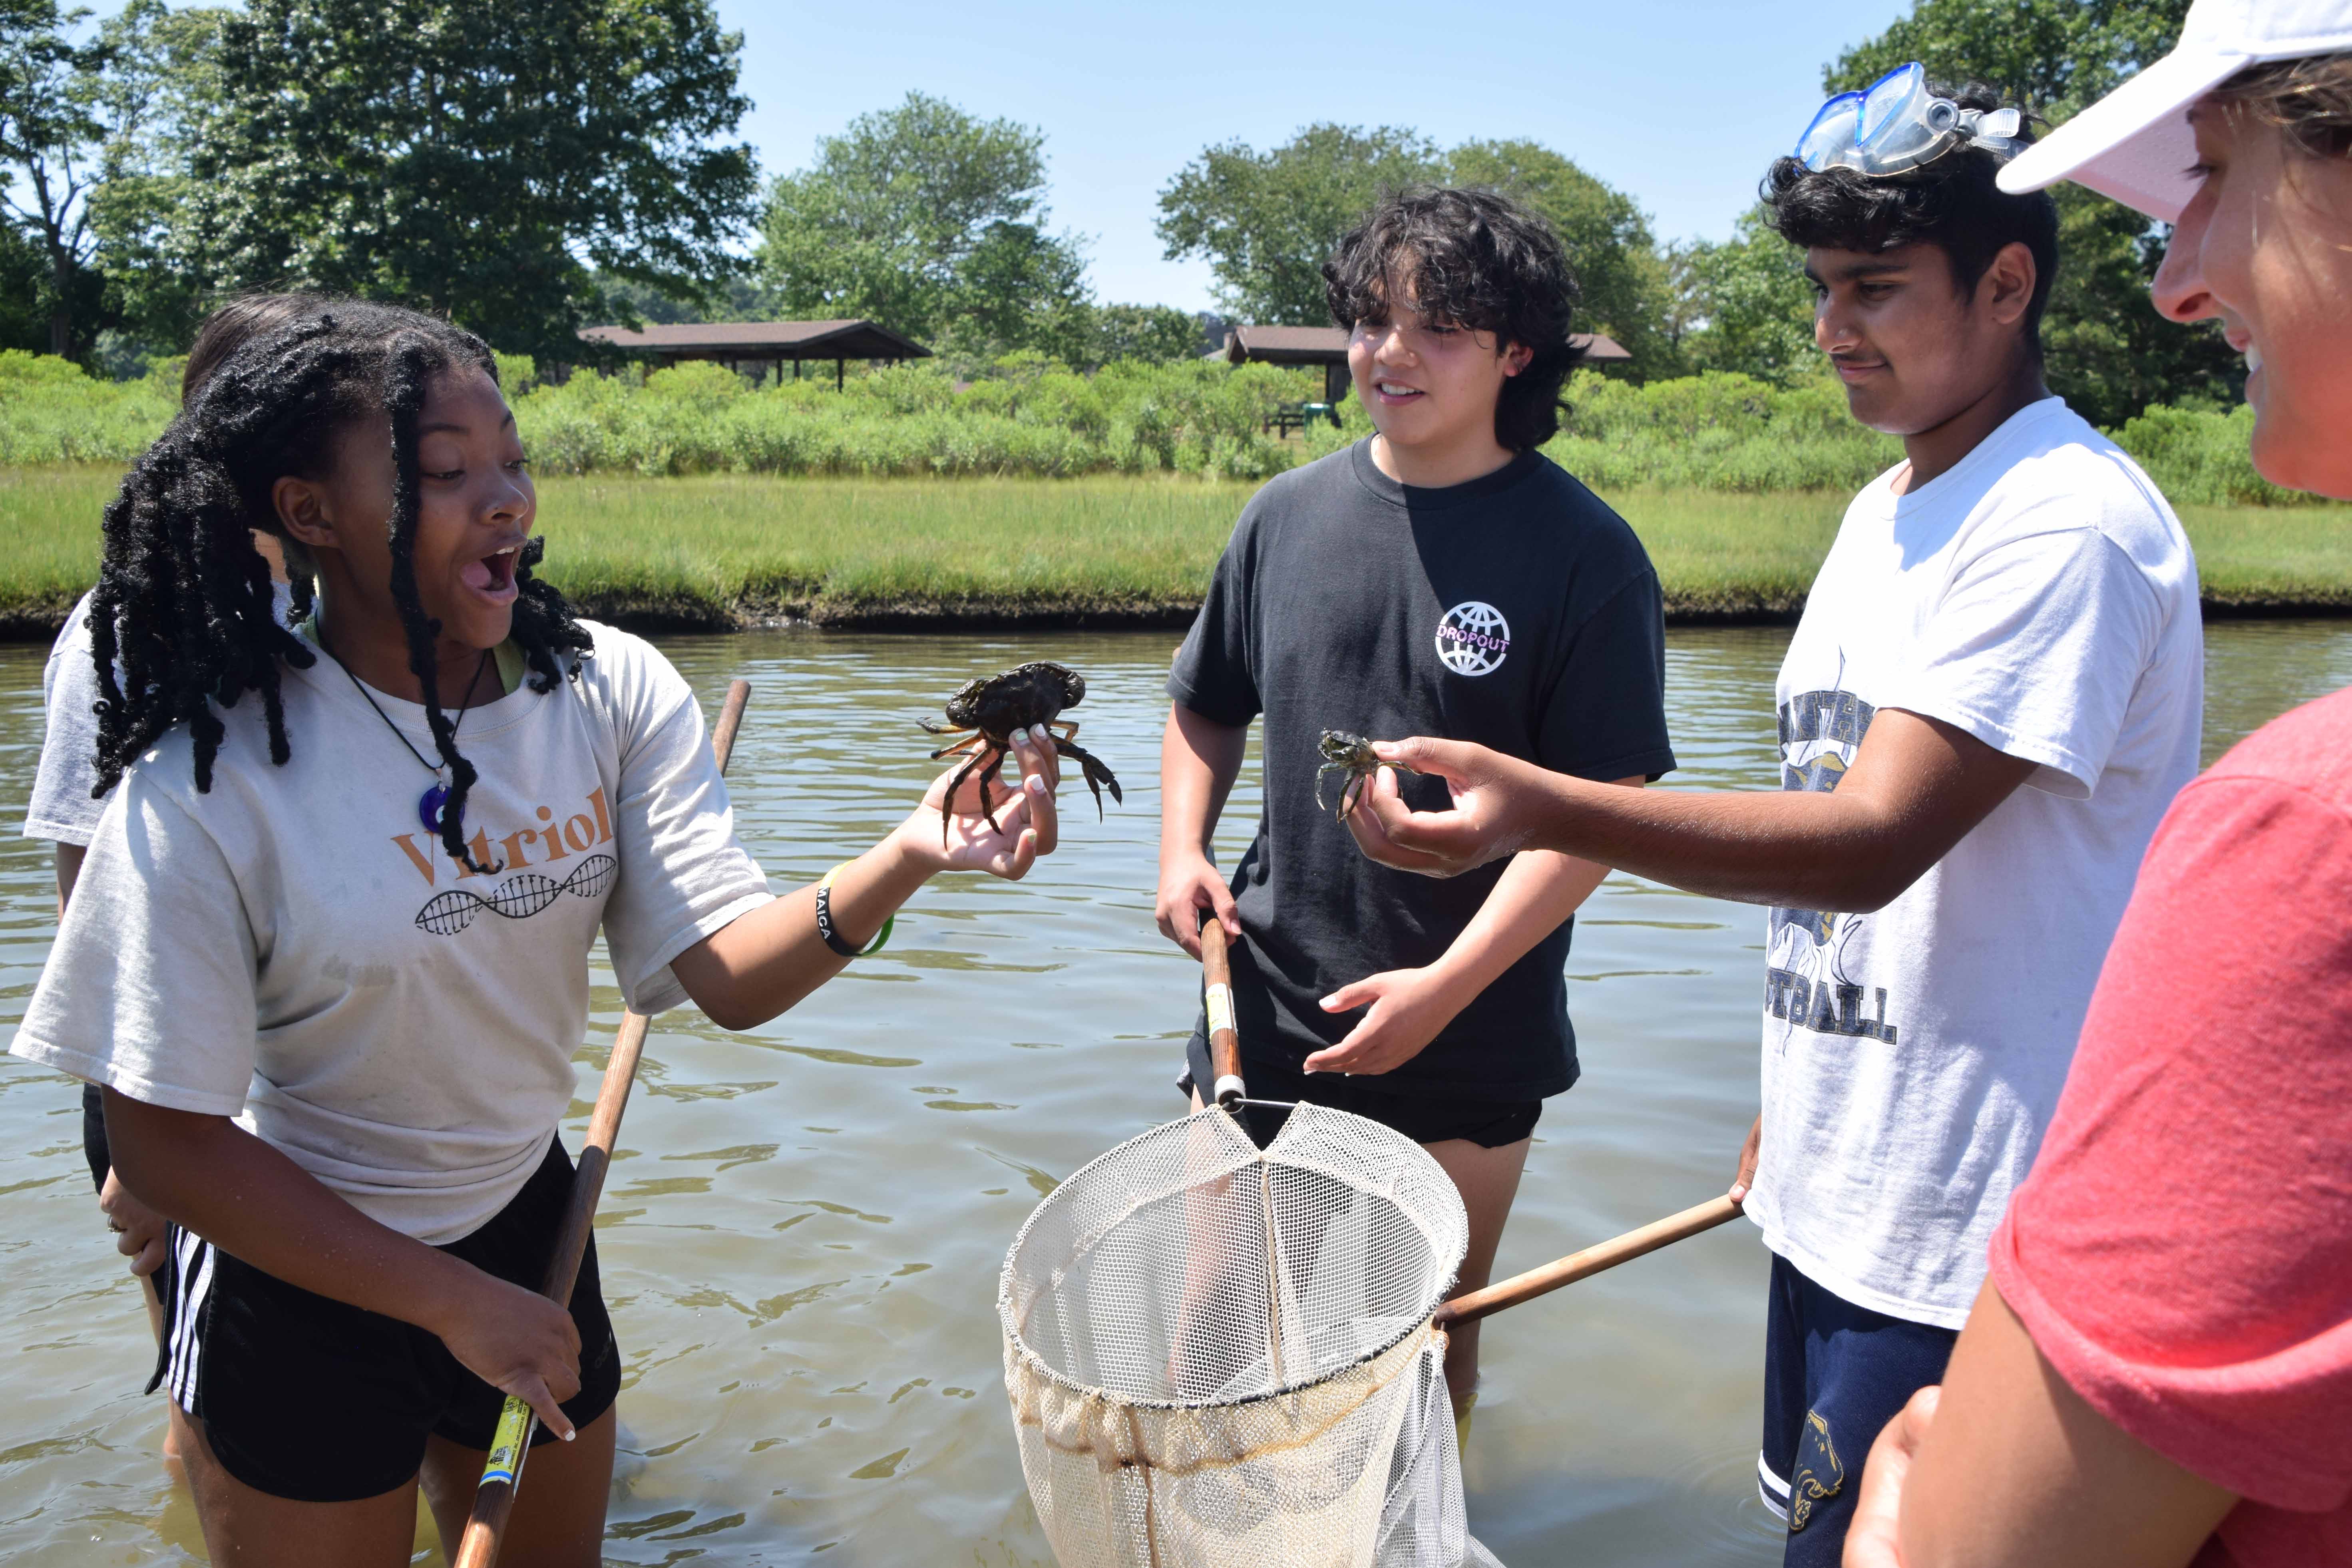 a group of teens pull critters out of a net while standing in water